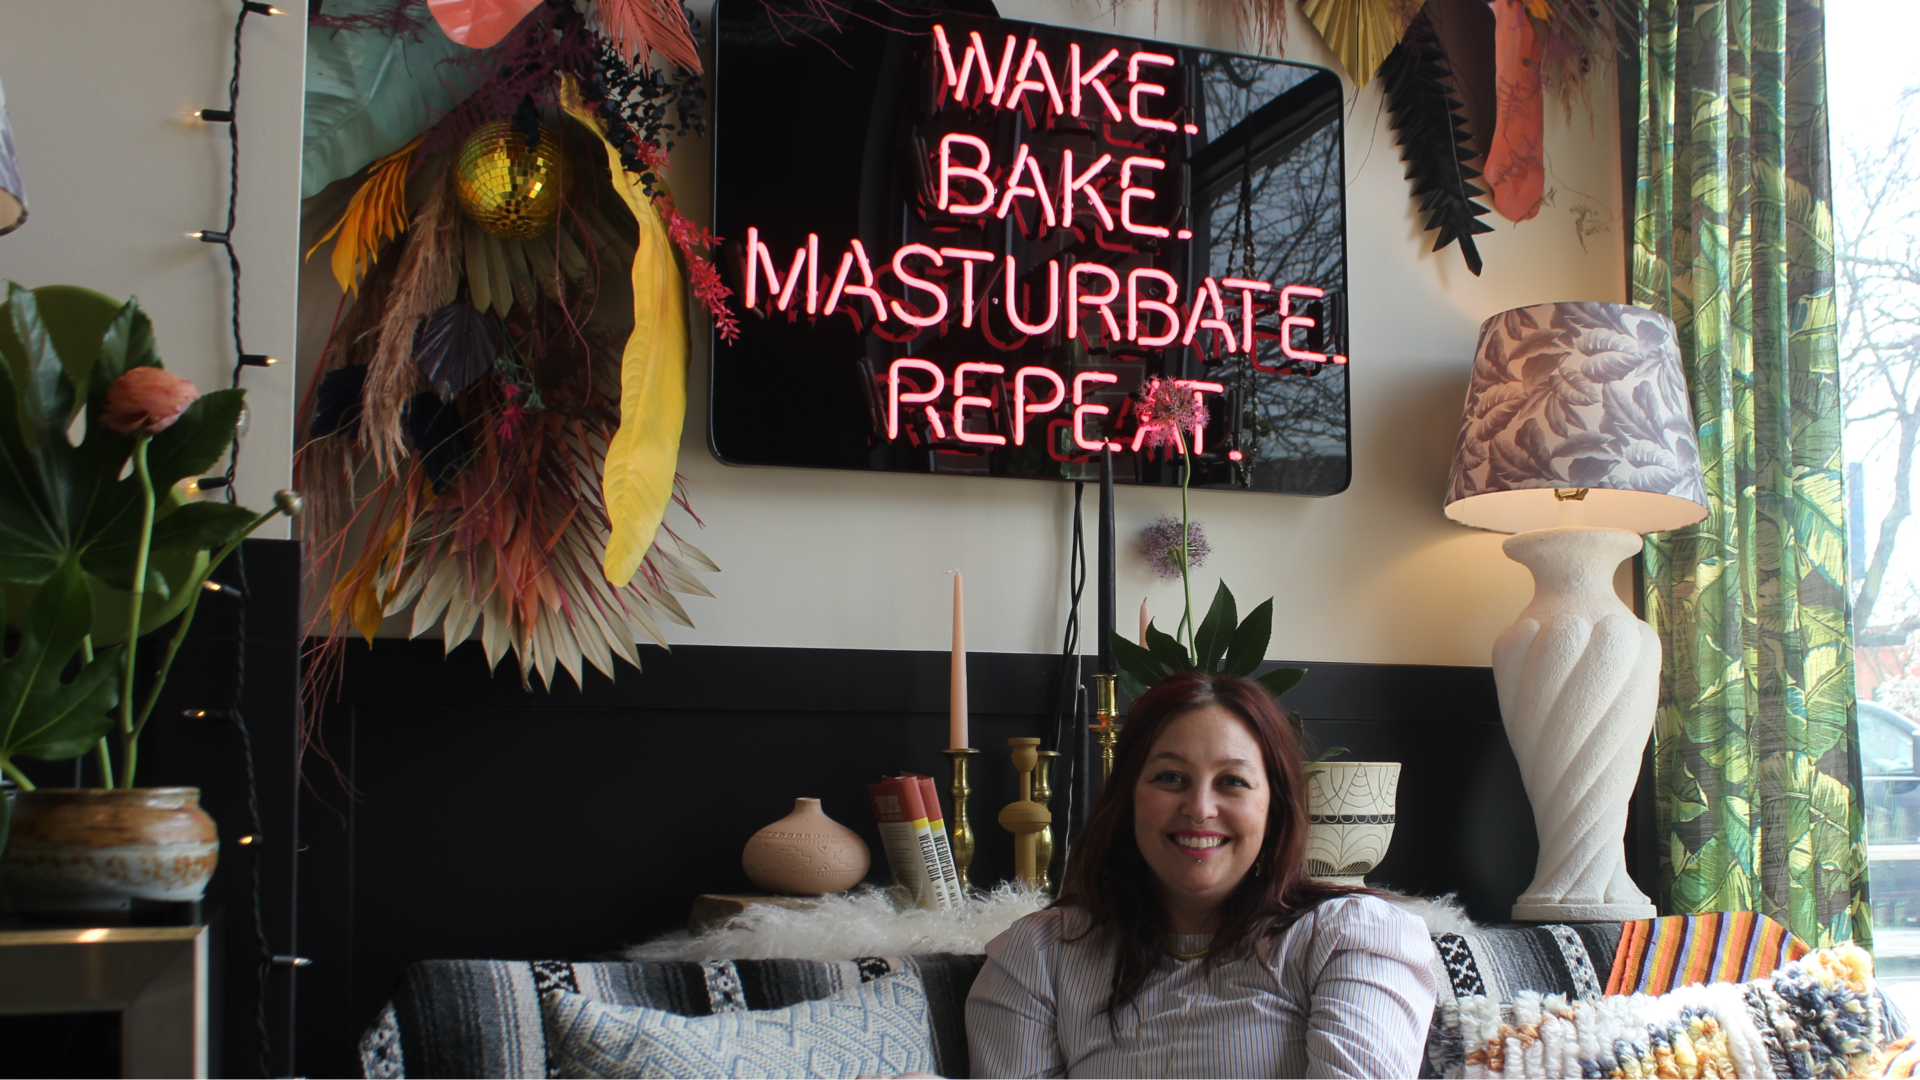 Andi in front of a "wake up cook, masturbate, repeat" sign